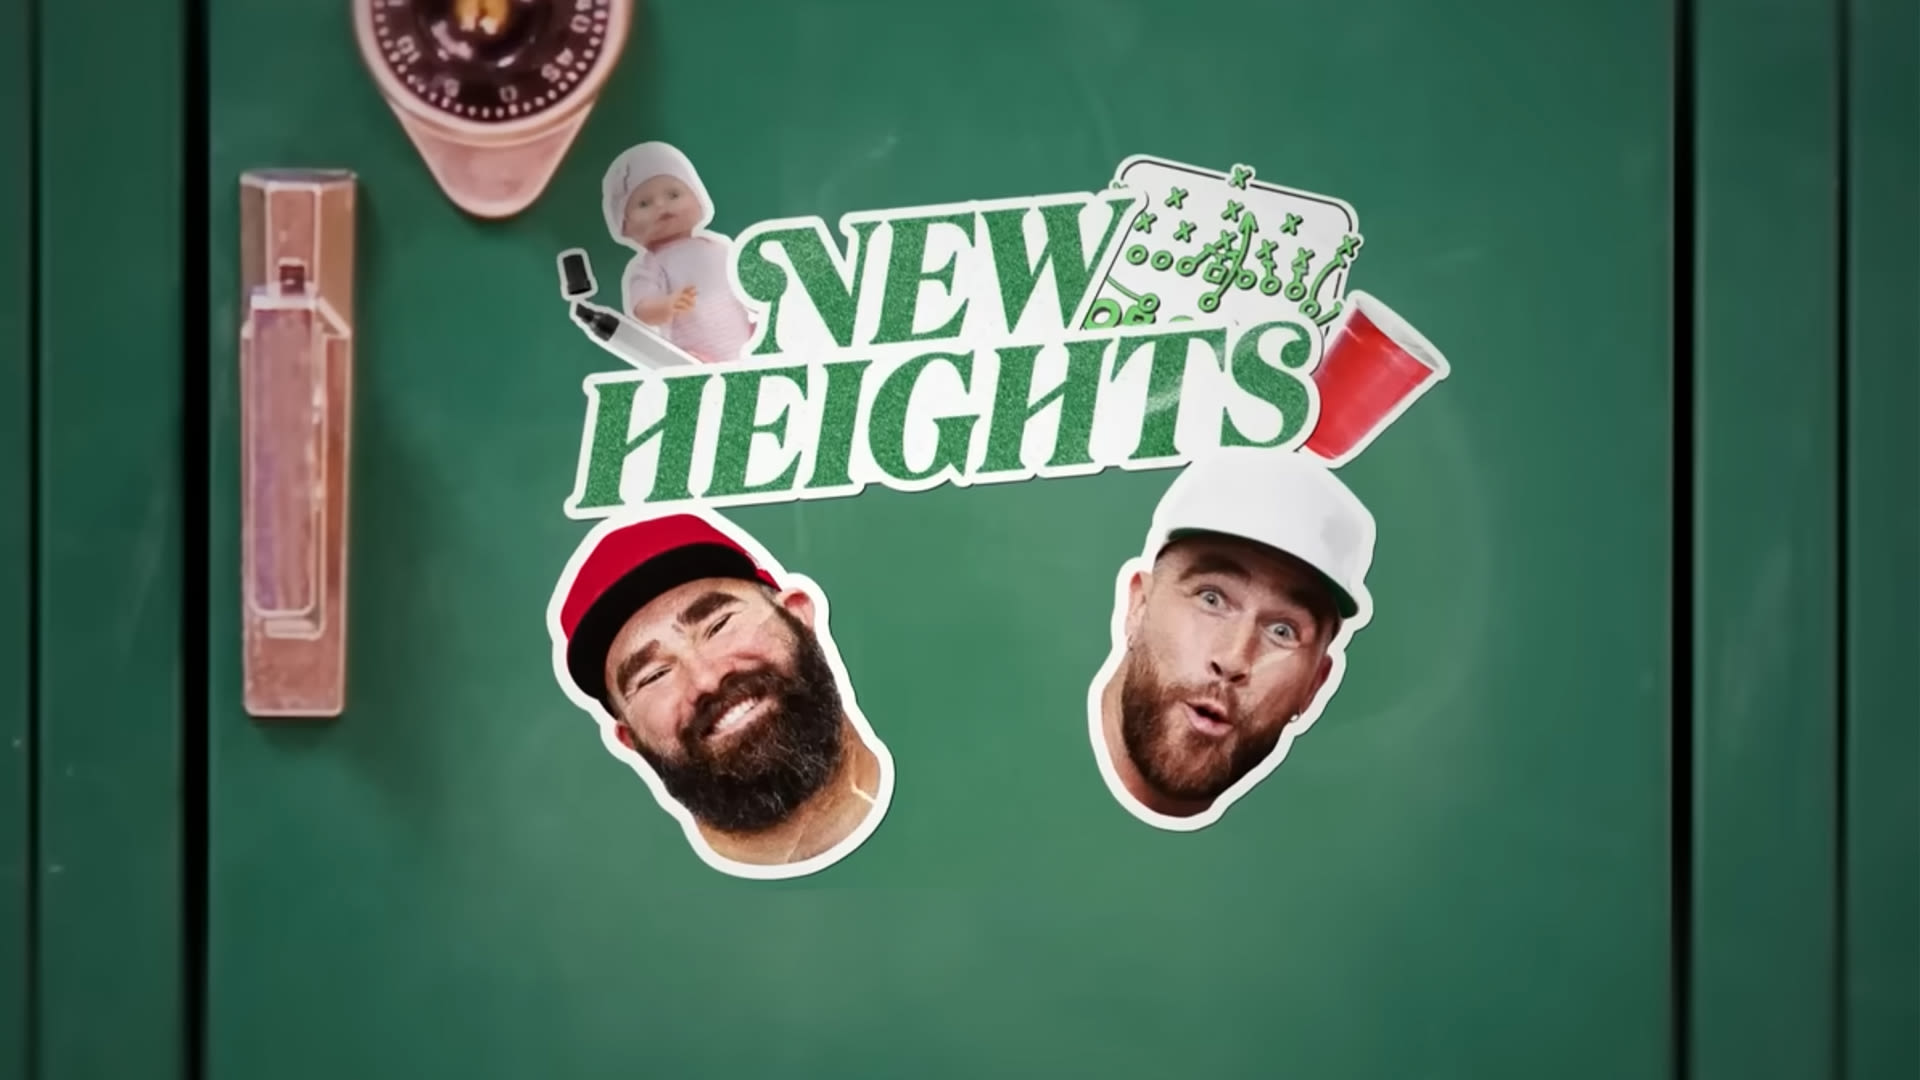 Travis and Jason Kelce in talks for shock New Heights move to Amazon